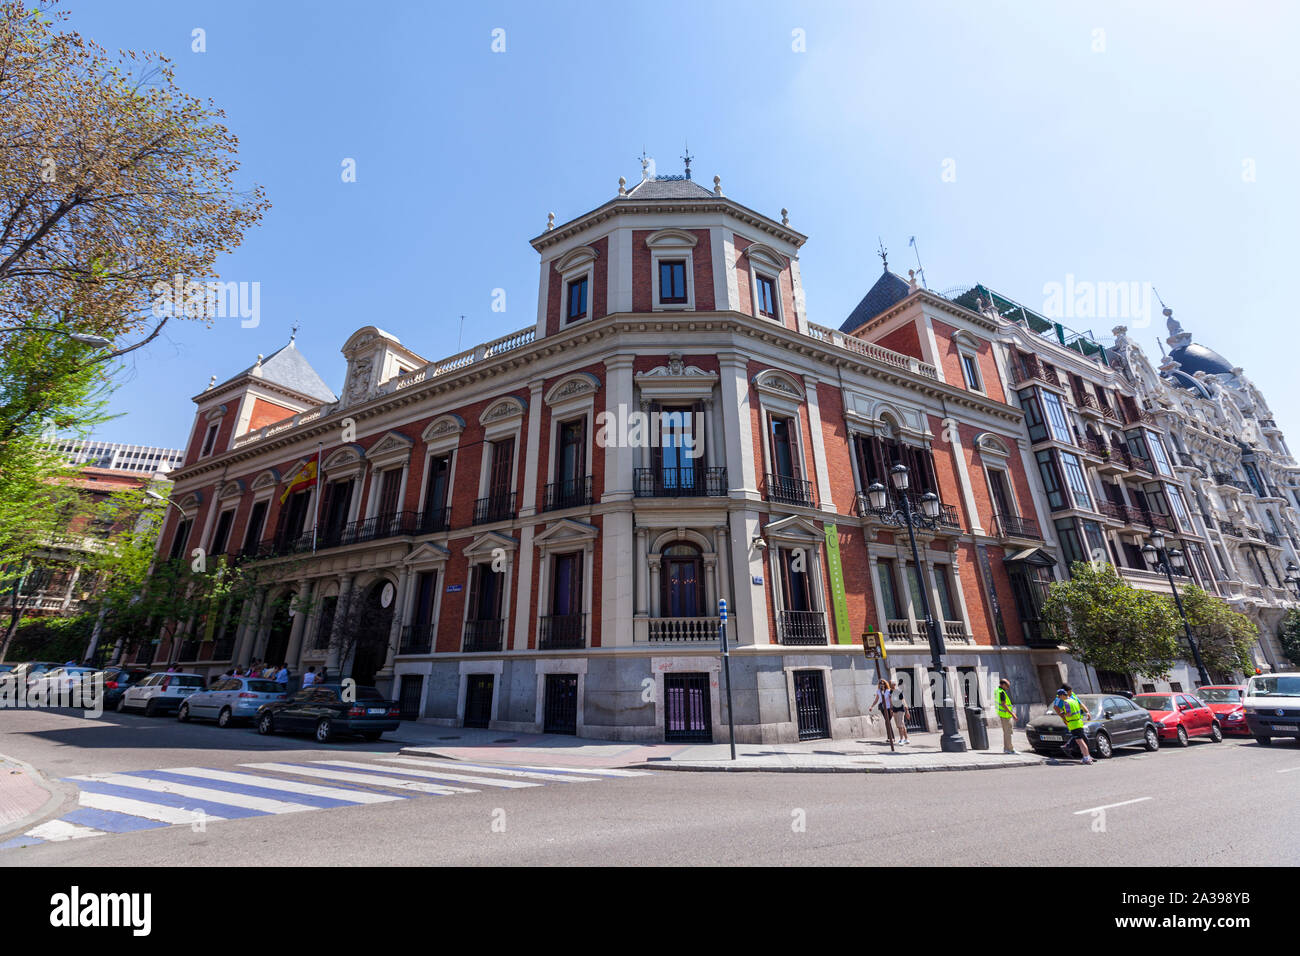 Facade of the Museo Cerralbo, Madrid, Spain Stock Photo